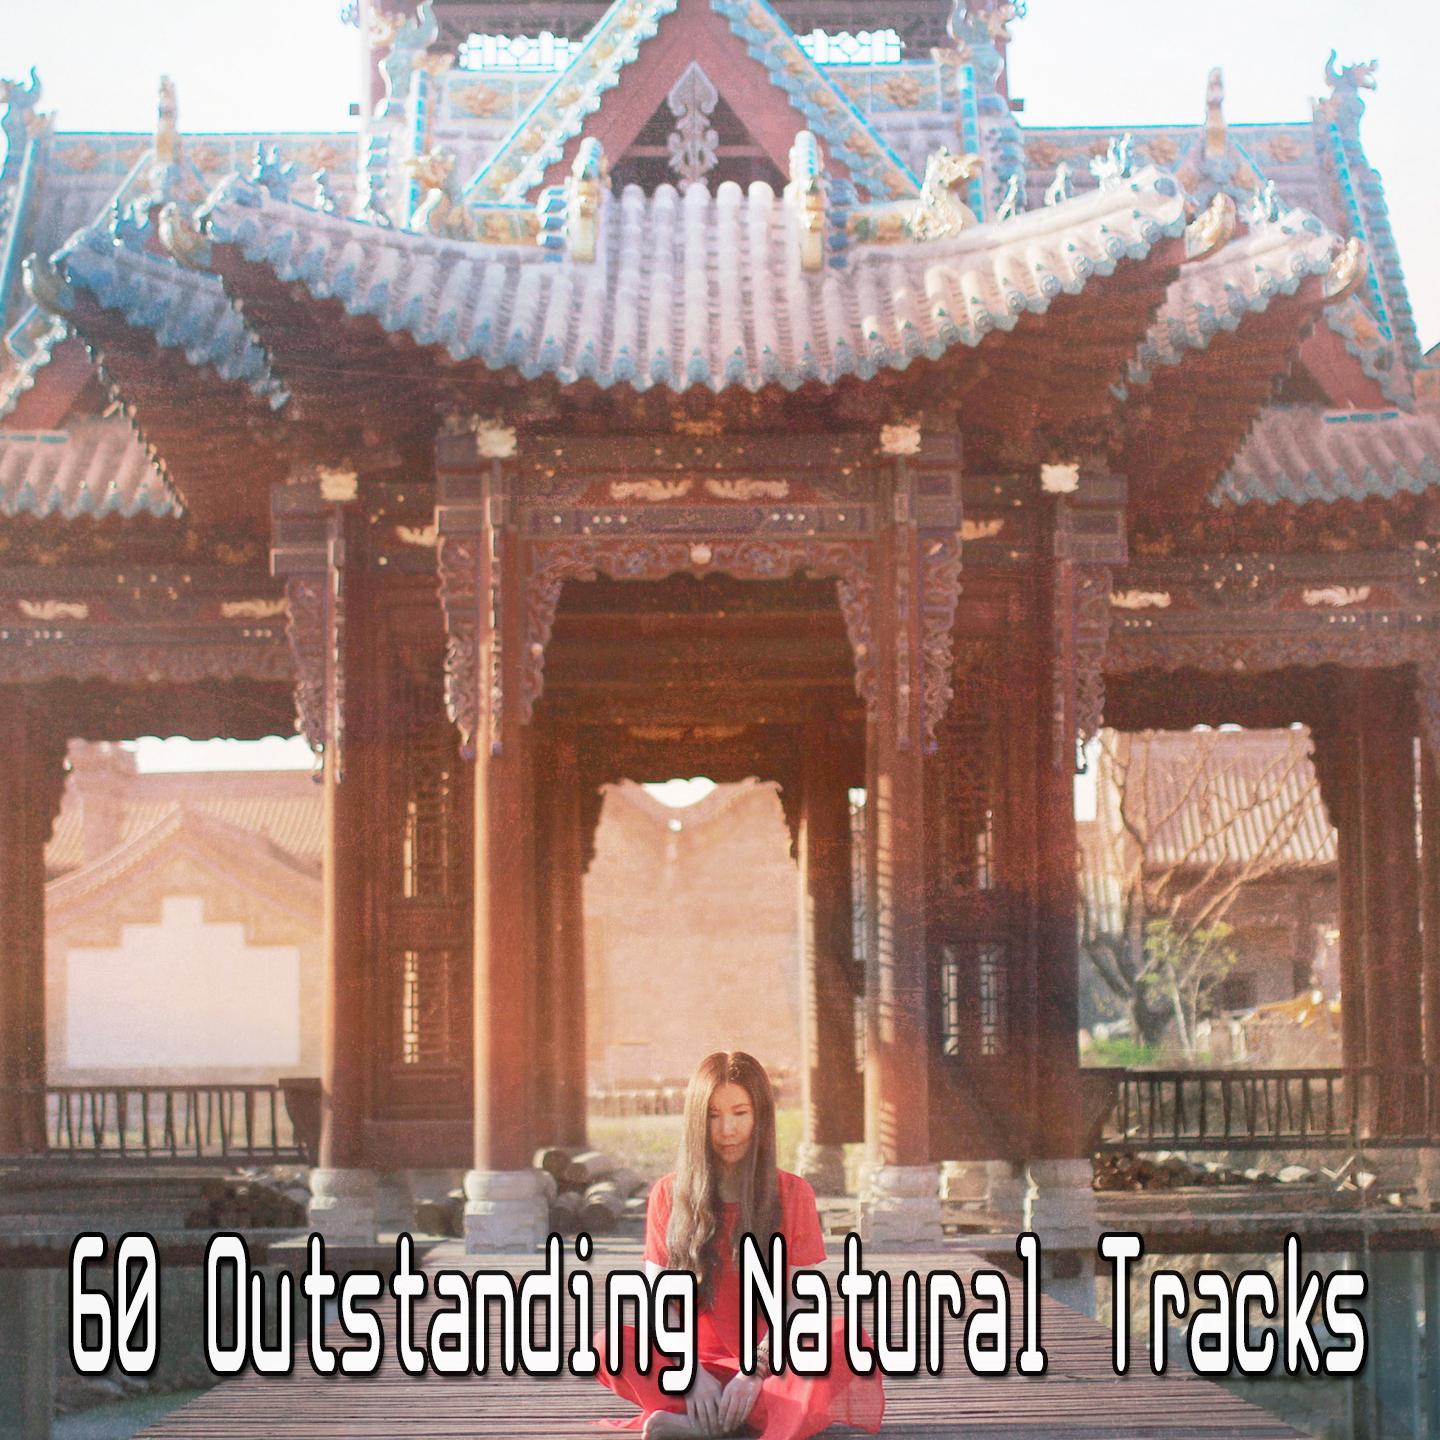 60 Outstanding Natural Tracks